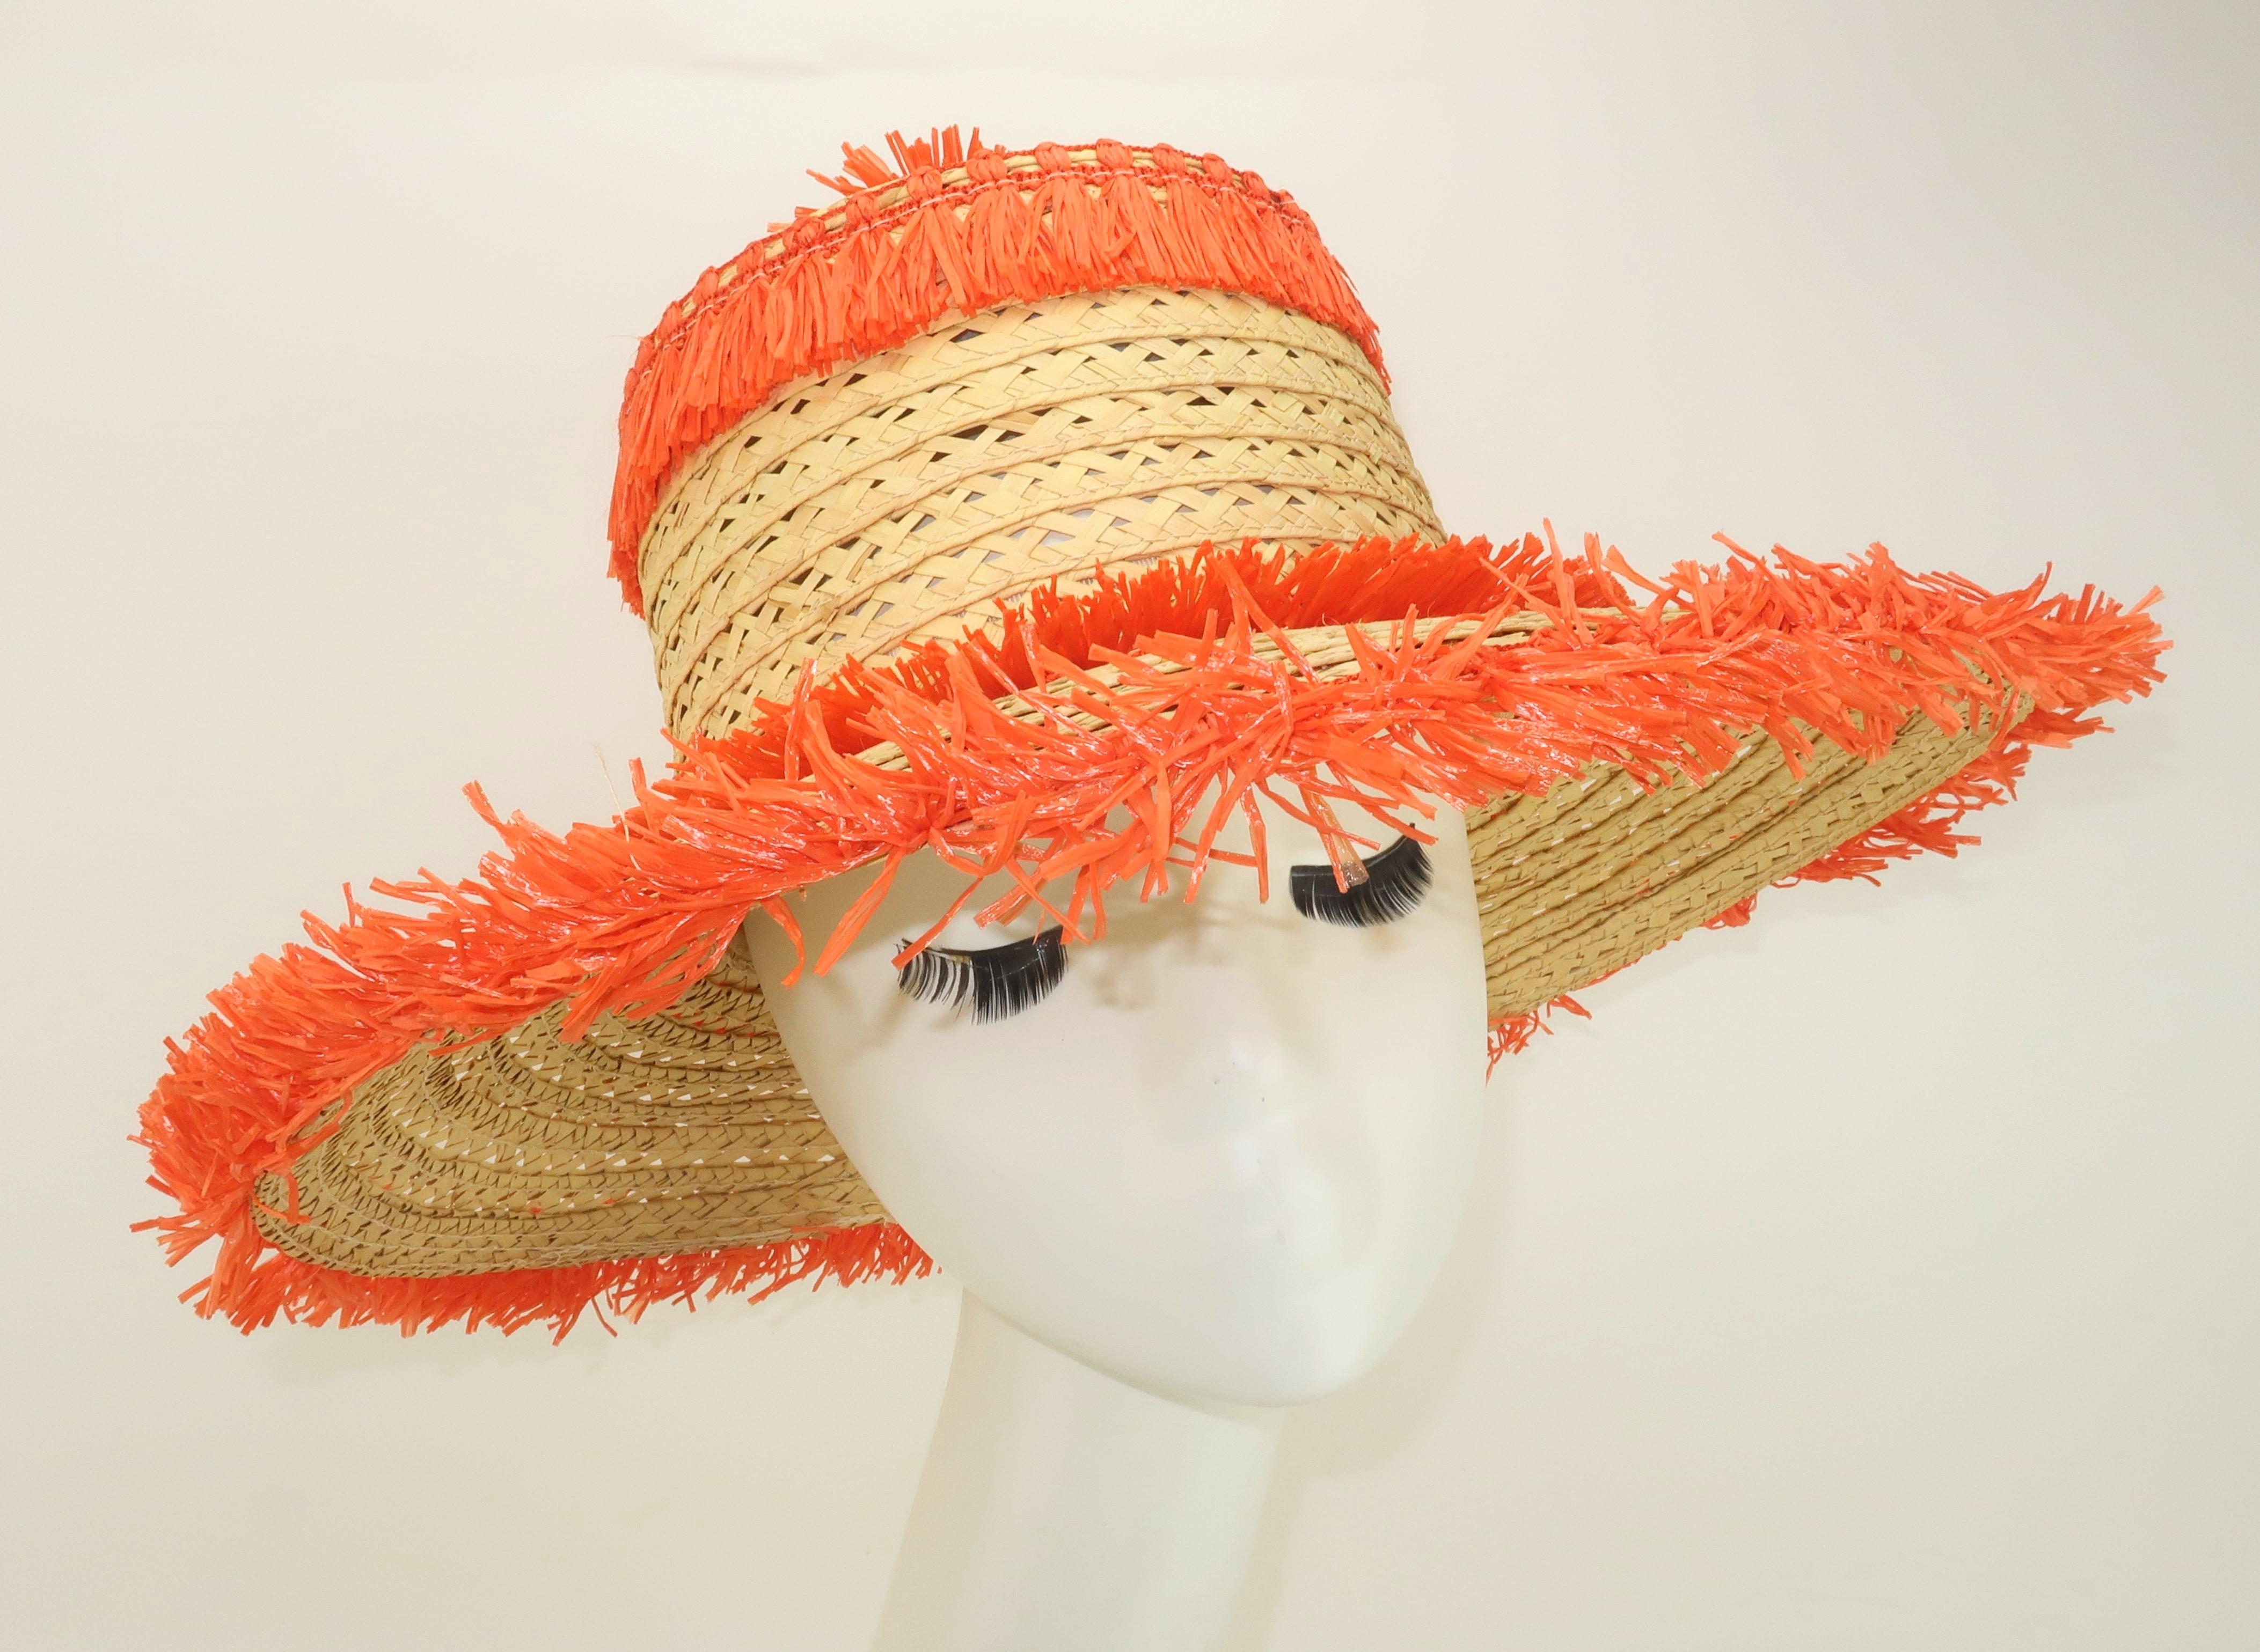 It's time for a little fun in the sun! 1960's Italian straw hat with a wide brim and whimsical orange raffia decoration including a flower pompom at the top of the crown. The open weave of the straw provides cooling ventilation and the grosgrain